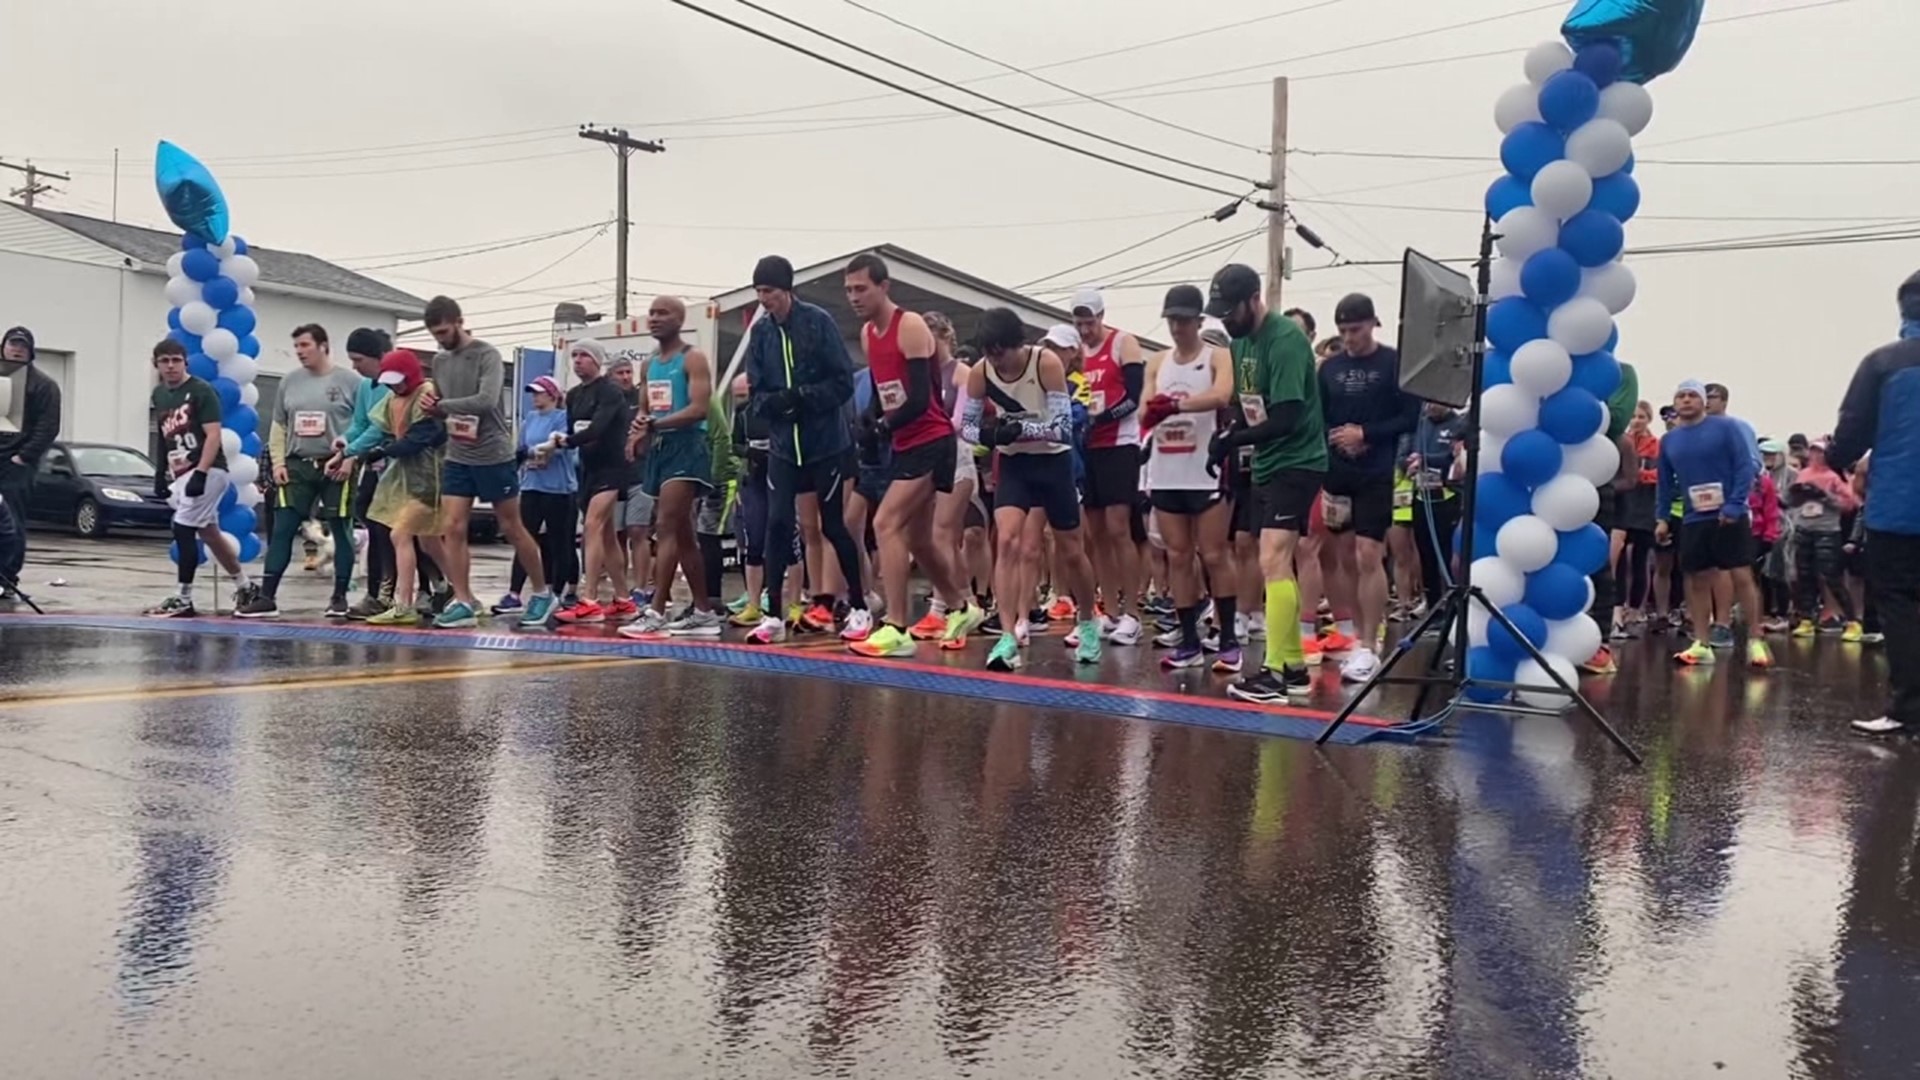 Sunday's rain made for some imperfect conditions for runners at the Scranton Half Marathon but many tell us that wouldn't keep them from achieving their goals.